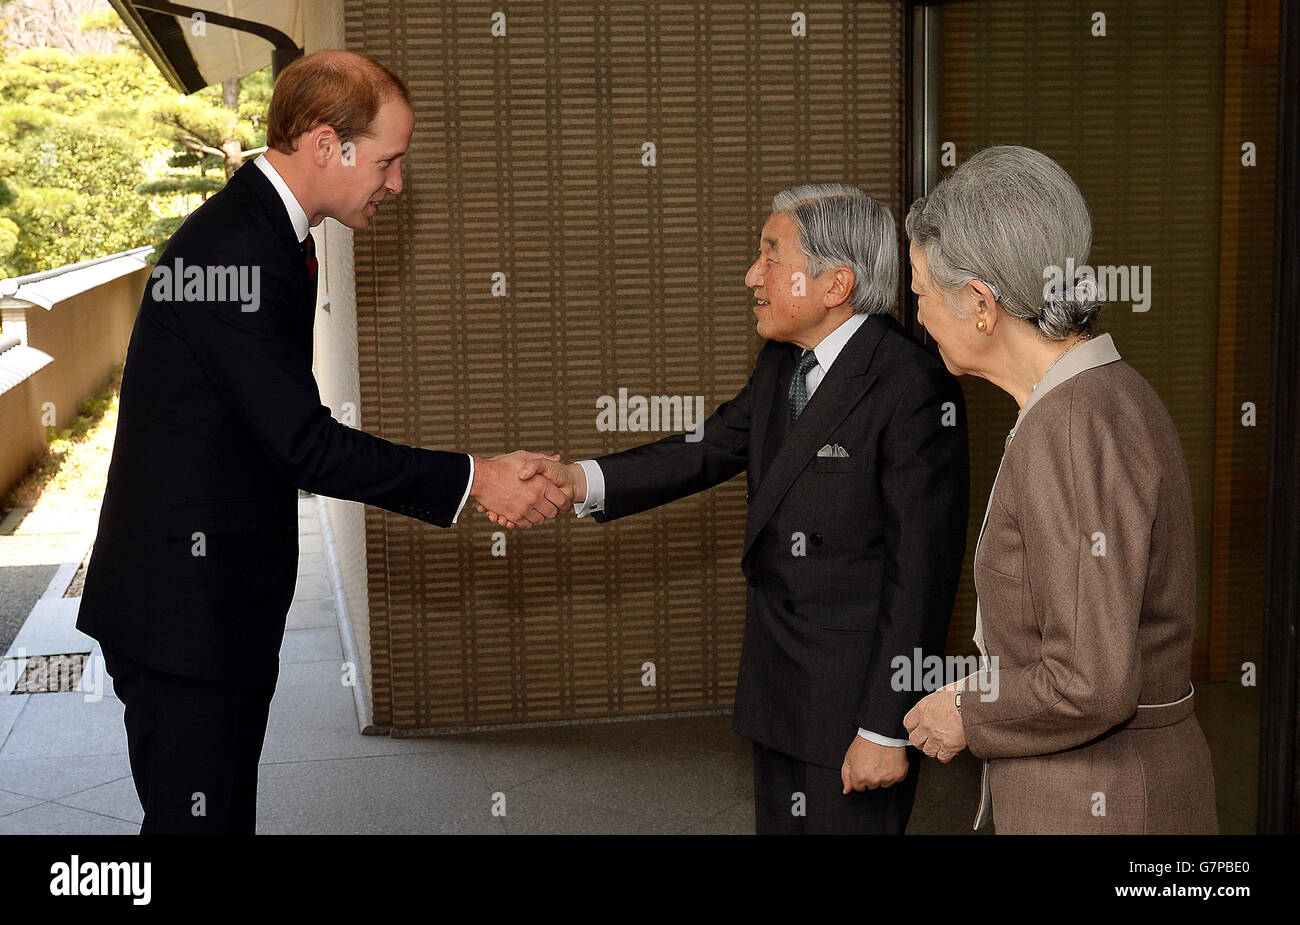 The Duke of Cambridge shakes hands with Emperor Akihito watched by Empress Michiko, after he arrived for lunch at the couple's residence within the Royal Palace grounds in central Tokyo, during the second day of his trip to Japan. Stock Photo